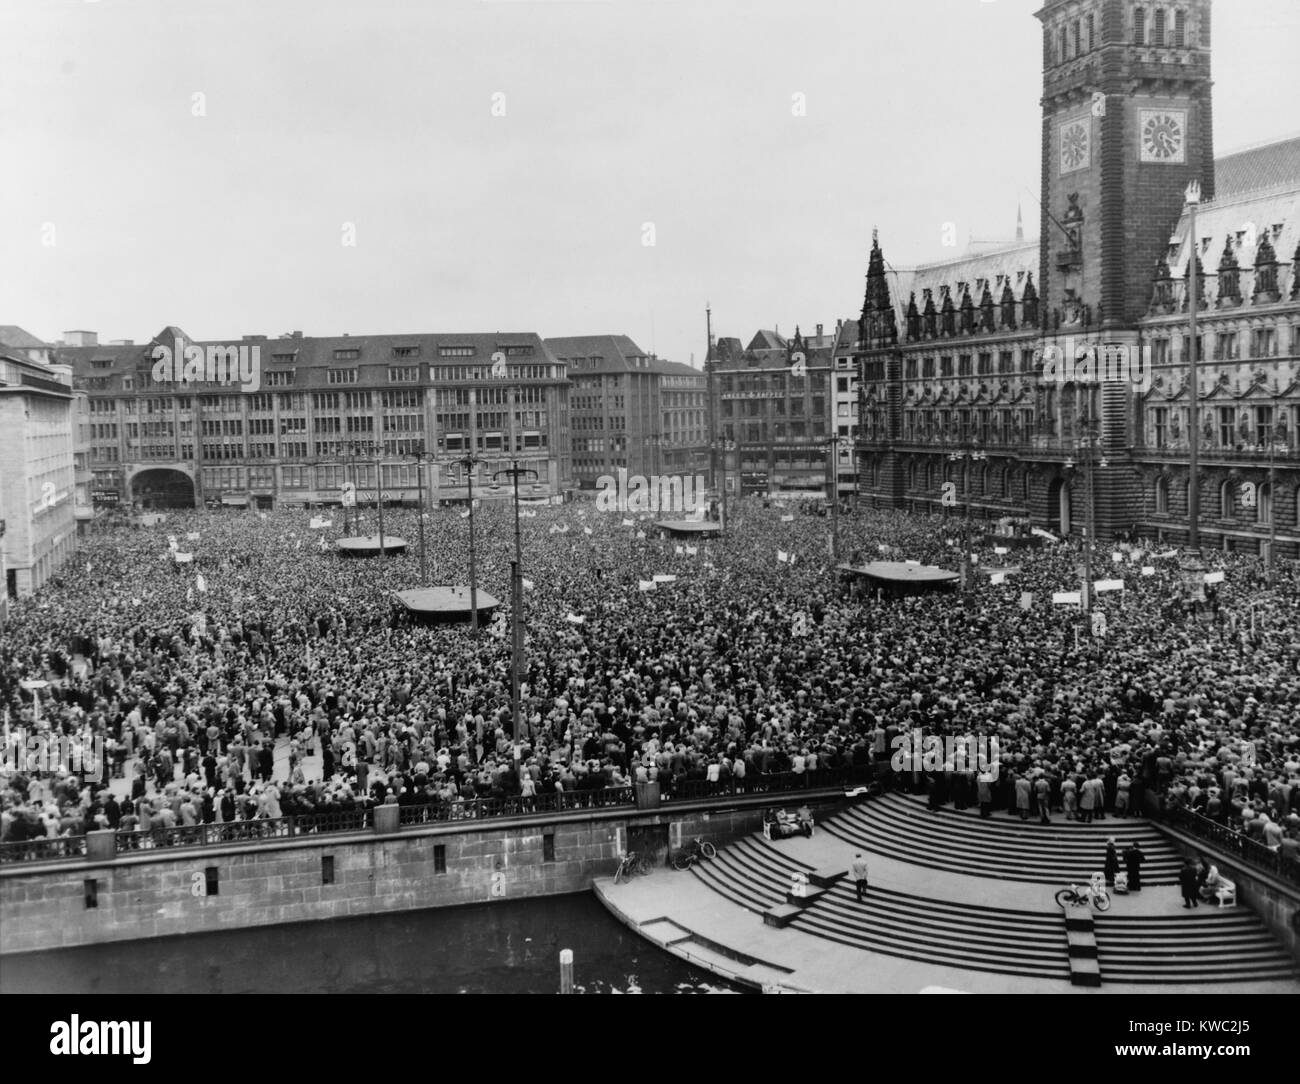 Massive anti-nuclear demonstration against atomic armament for the West German Army. City Hall Square, Hamburg, West Germany. 1958. (BSLOC 2015 2 36) Stock Photo